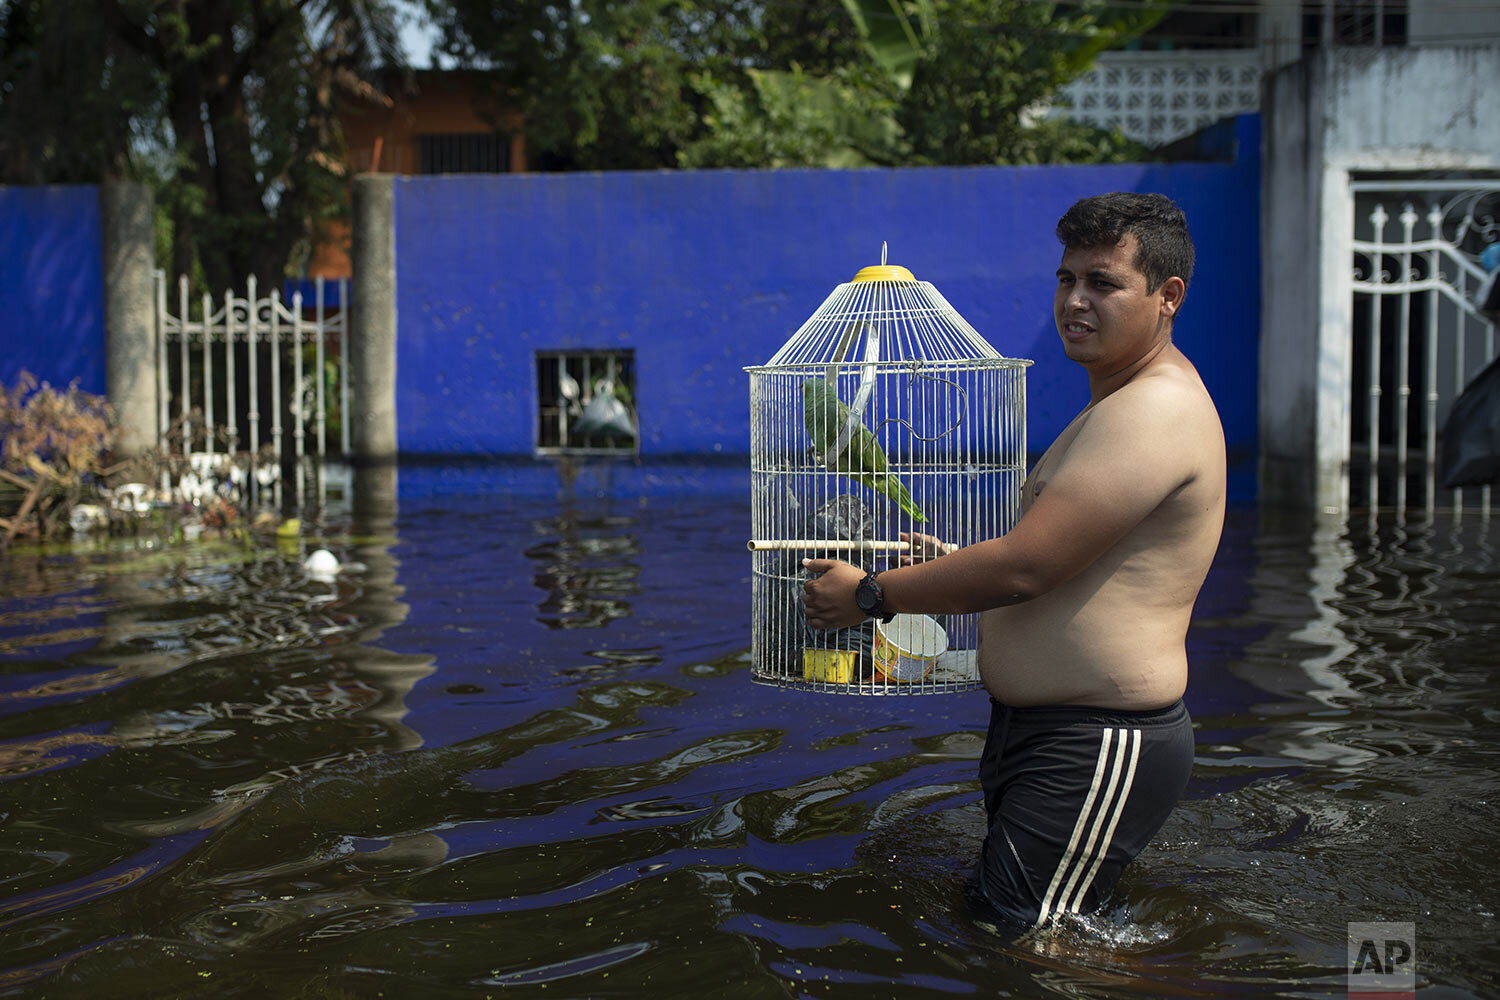  A resident wades through an inundated neighborhood carrying a bird in a cage, in Villahermosa, Mexico, Wednesday, Nov. 11, 2020, where flooding caused by cold fronts came after rains associated with Tropical Storm Eta. (AP Photo/Felix Marquez) 